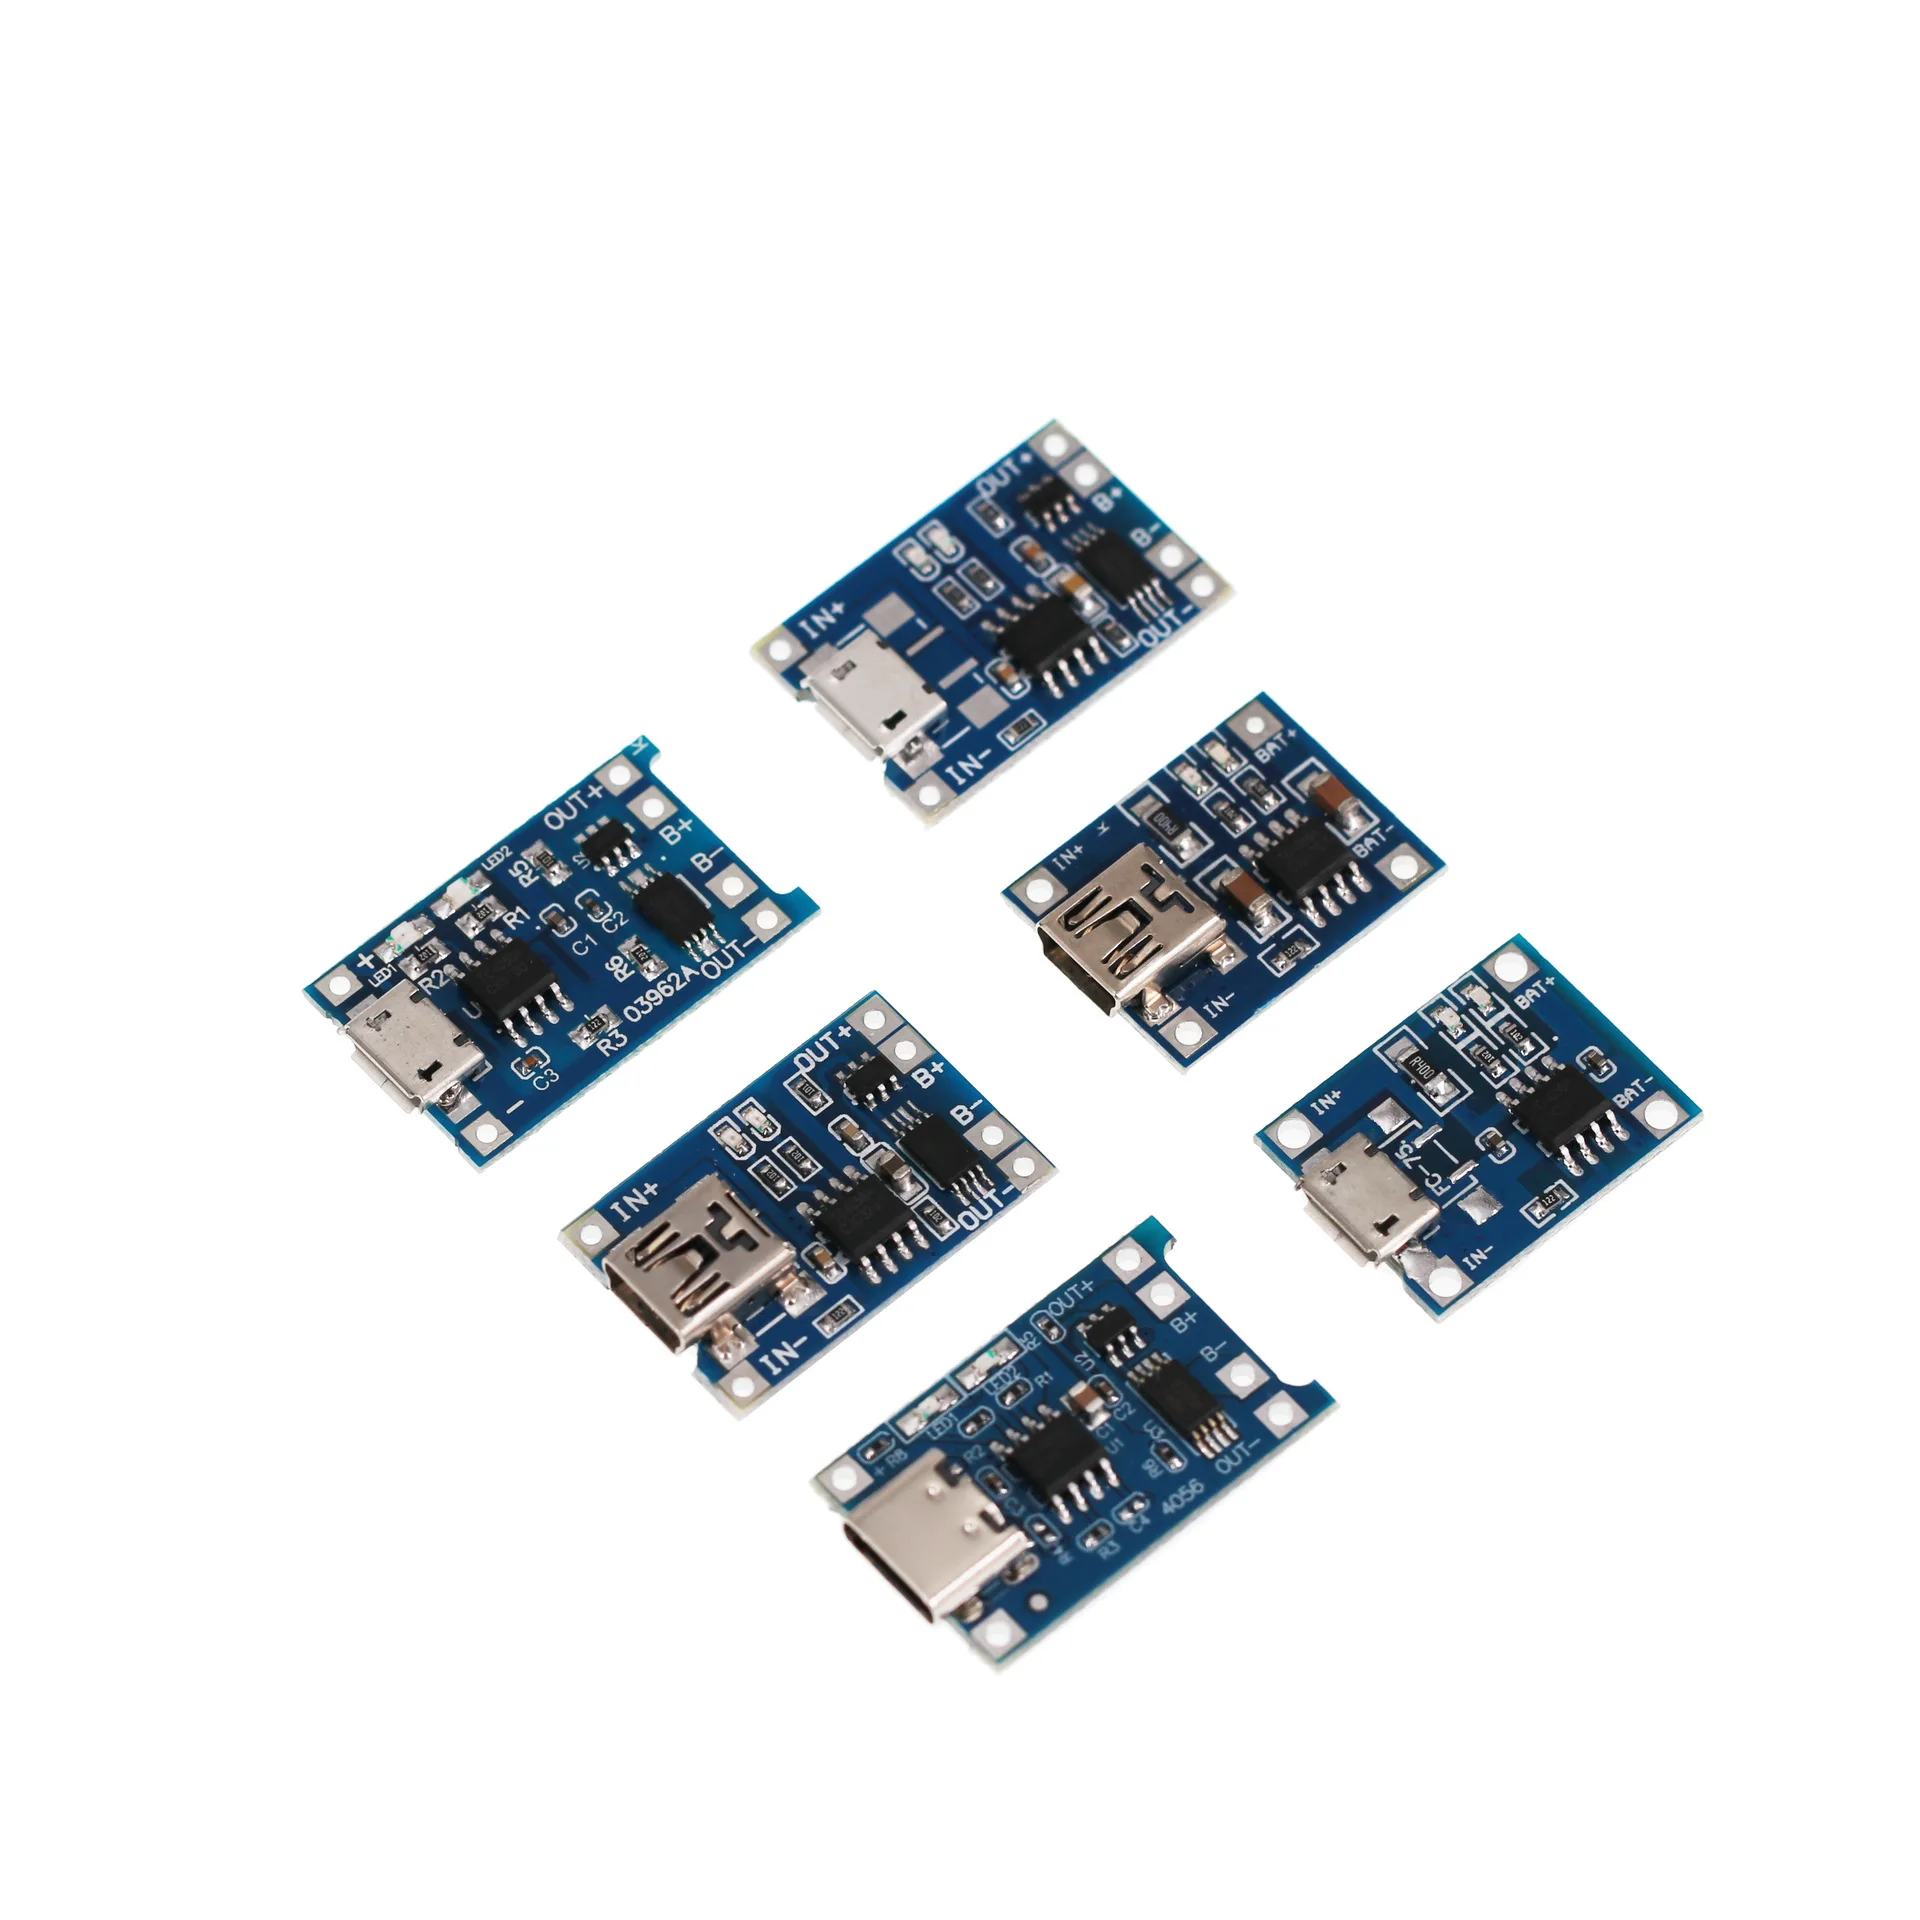 

10PCS TP4056 Micro USB Type-C 5V 1A 18650 Lithium Battery Charging Protection Board TE585 LIPO Charger Module DIY Parts